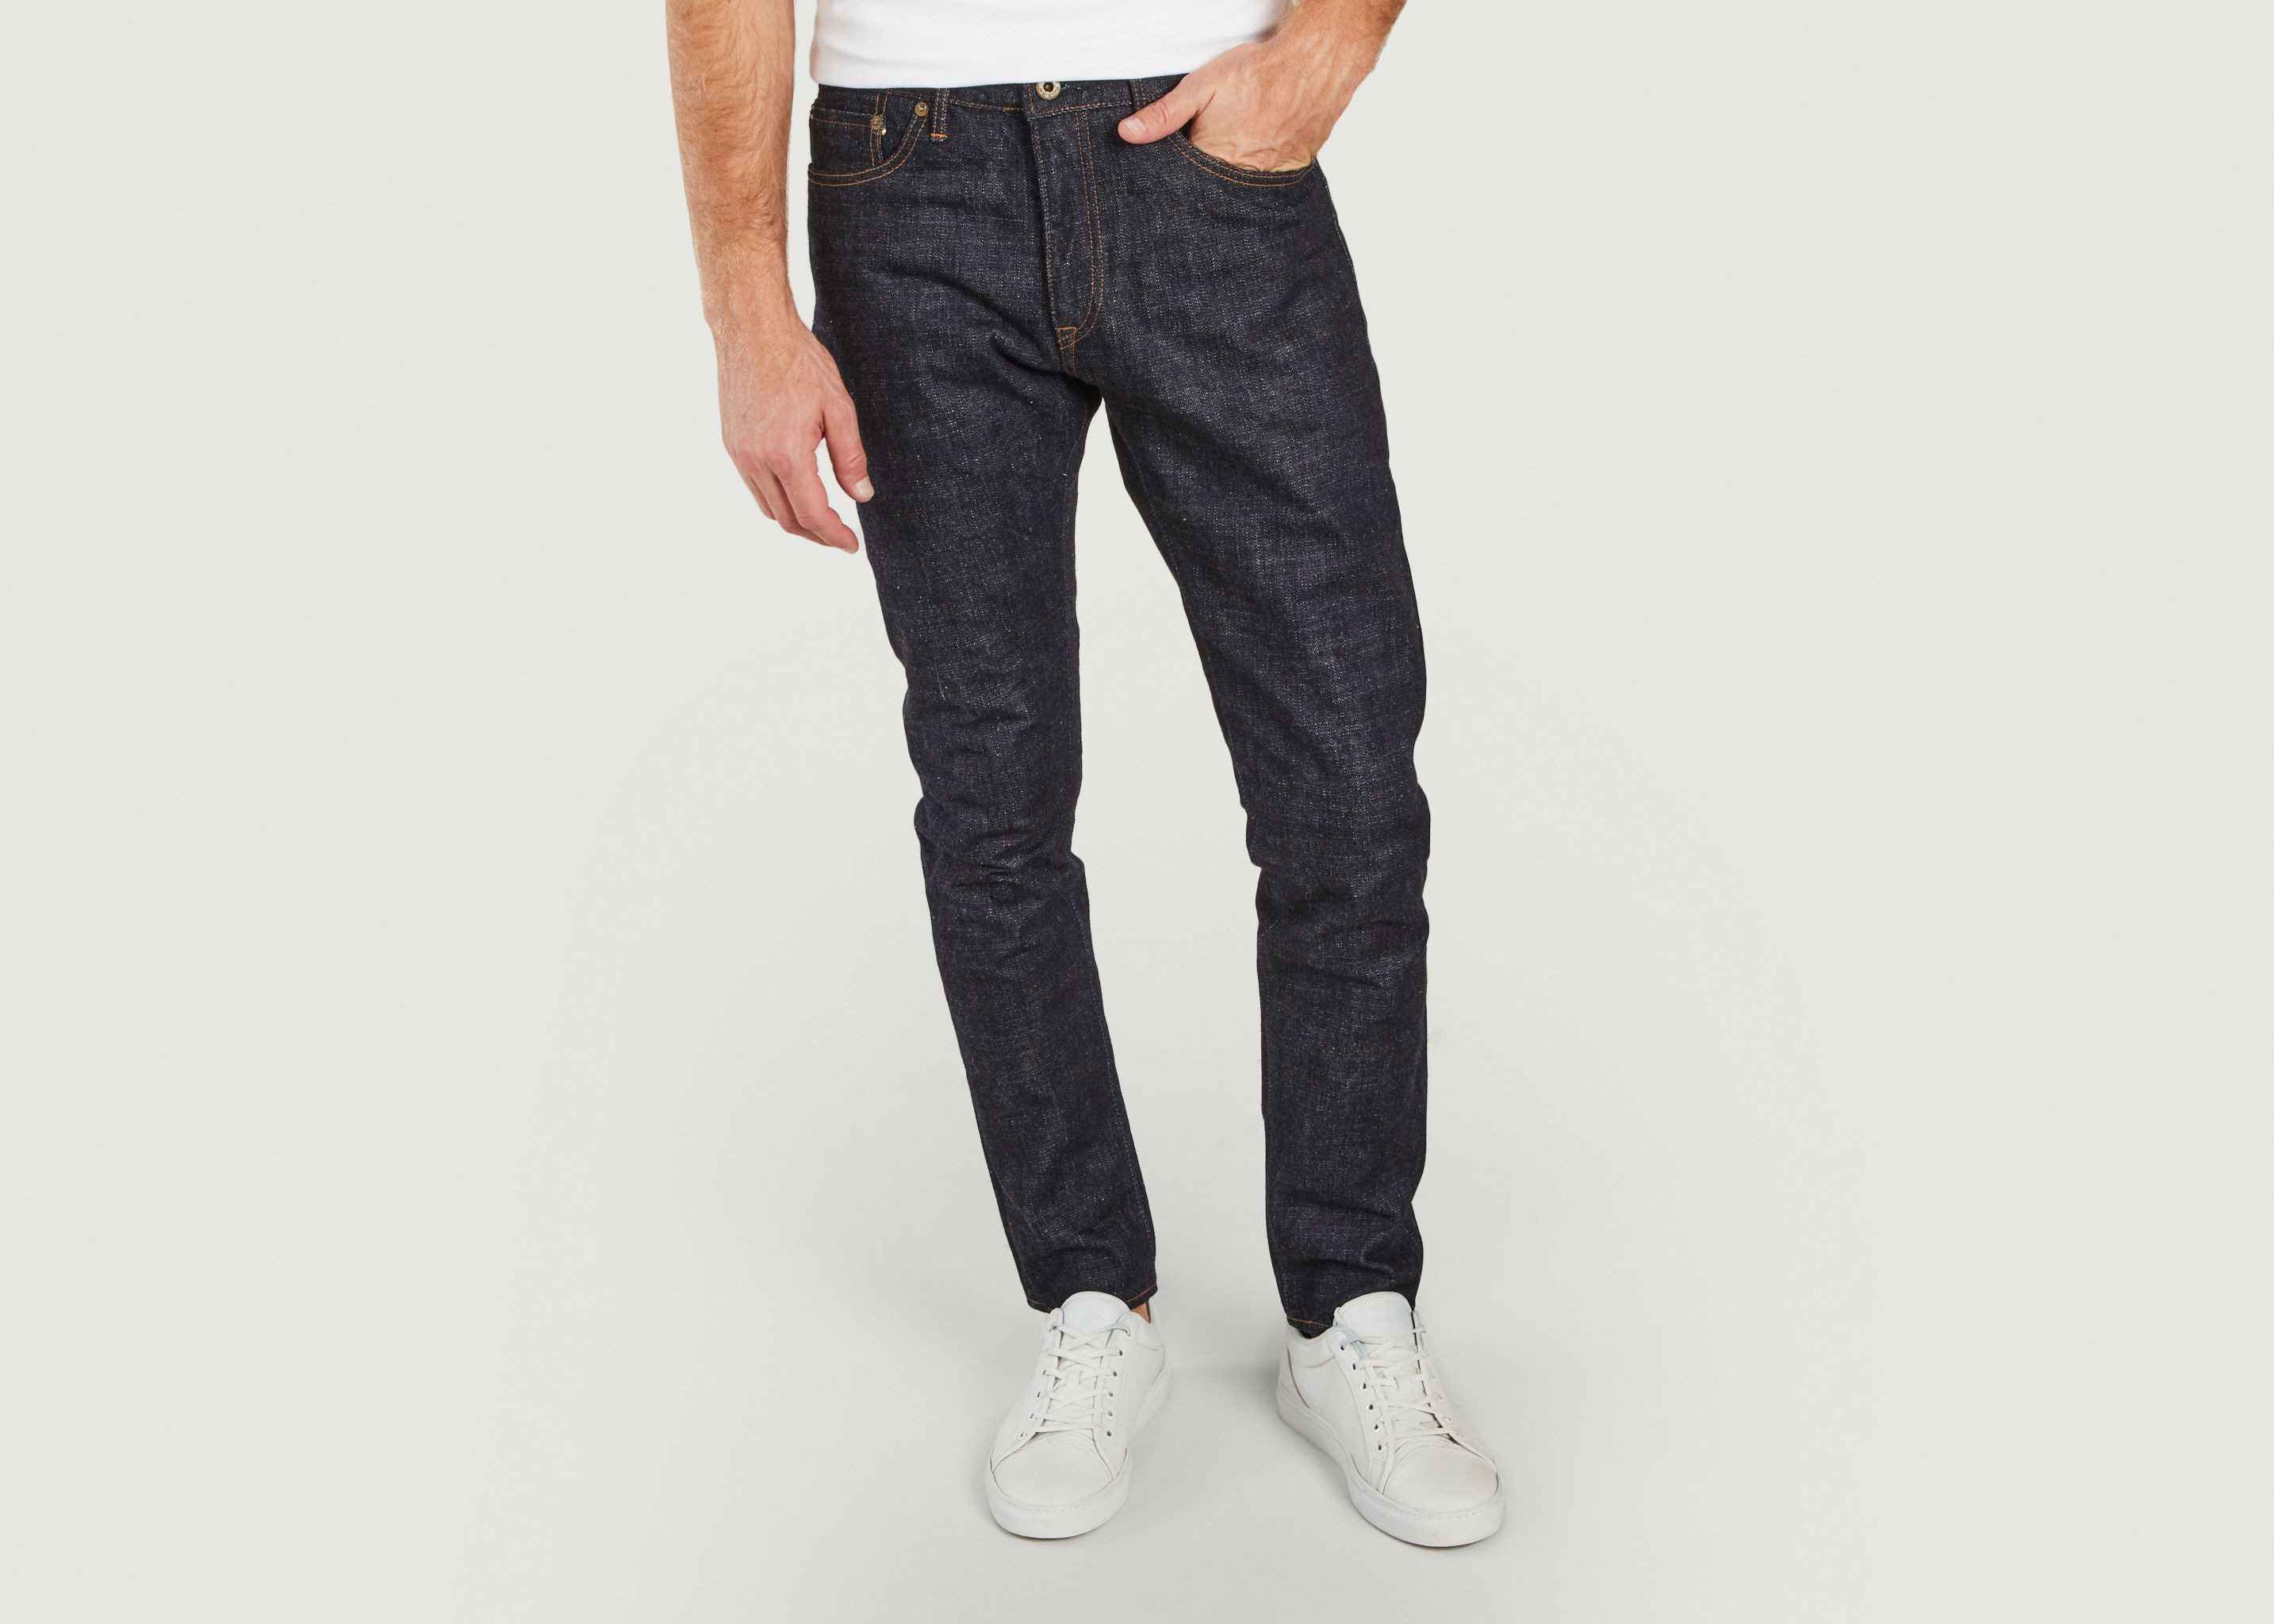 Circle selvedge tapered brutto jeans - Japan Blue Jeans